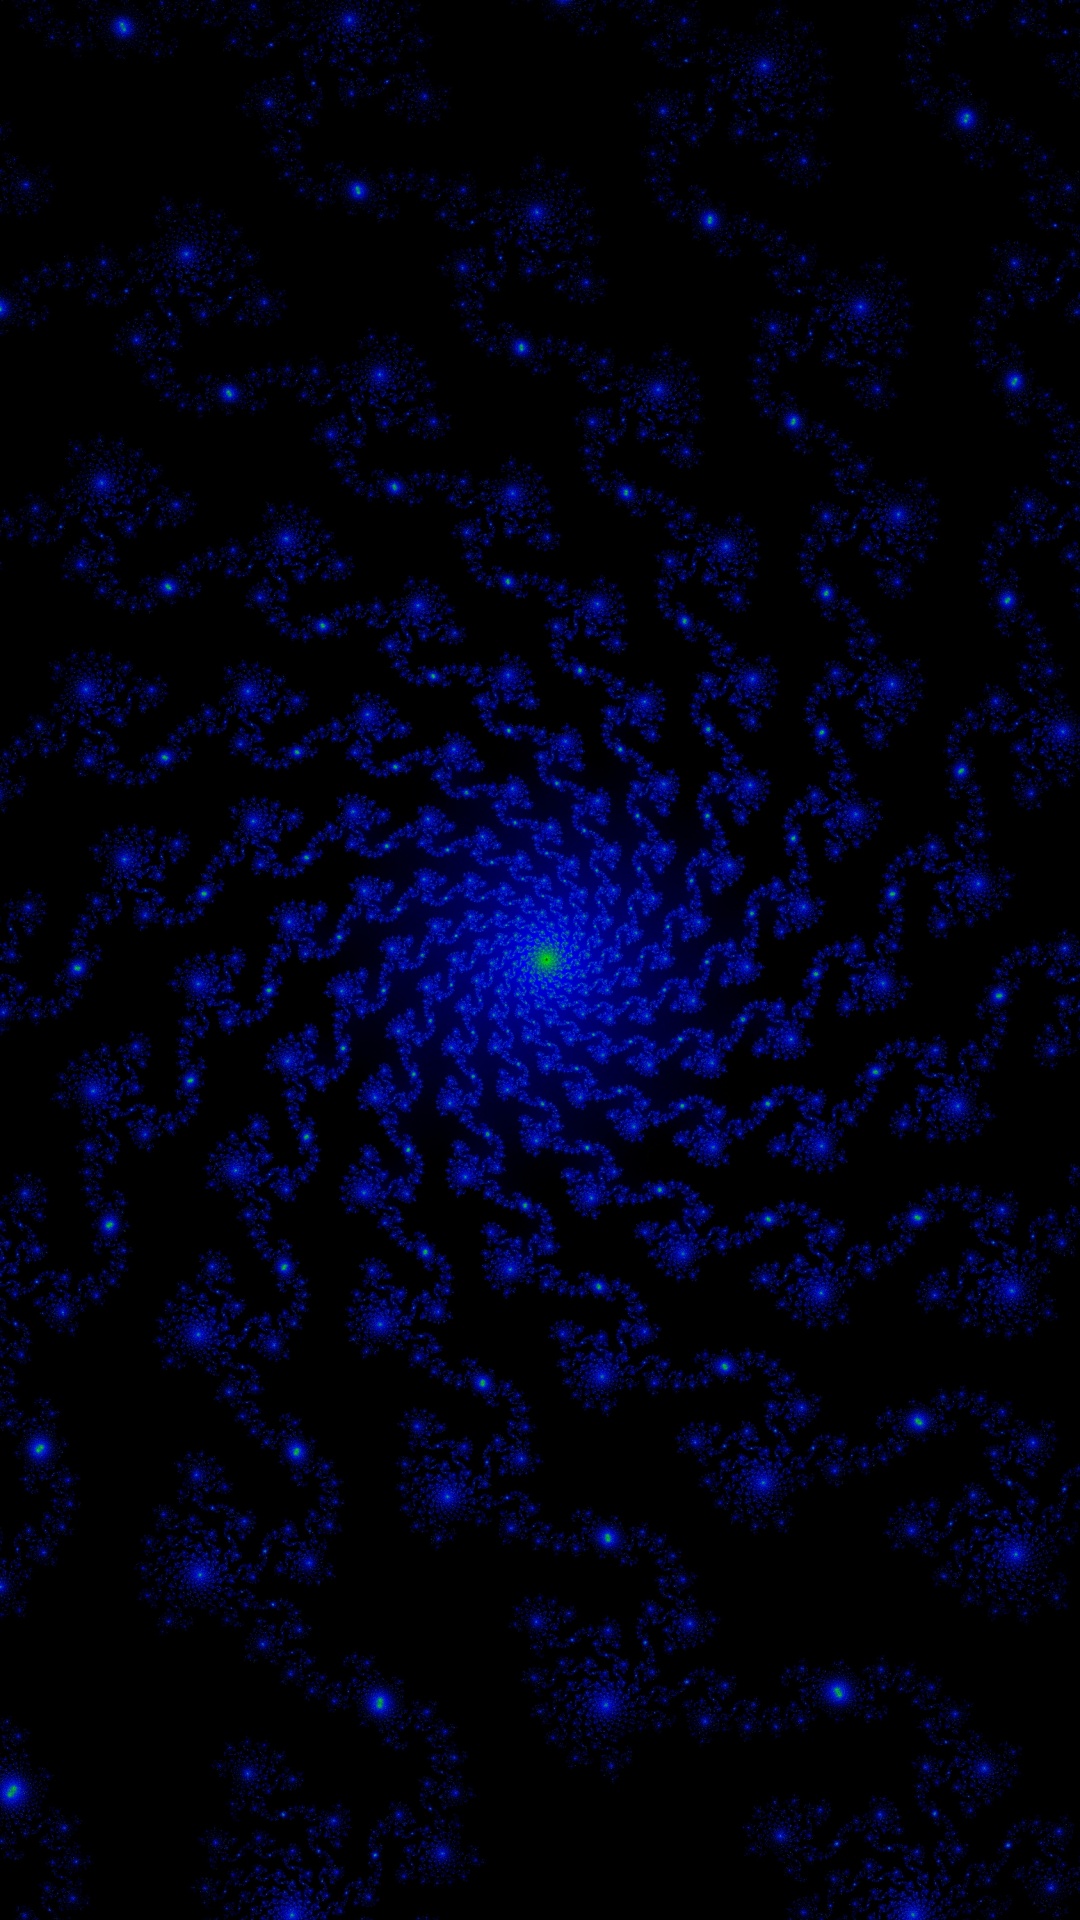 Blue and White Light in Black Background. Wallpaper in 1080x1920 Resolution